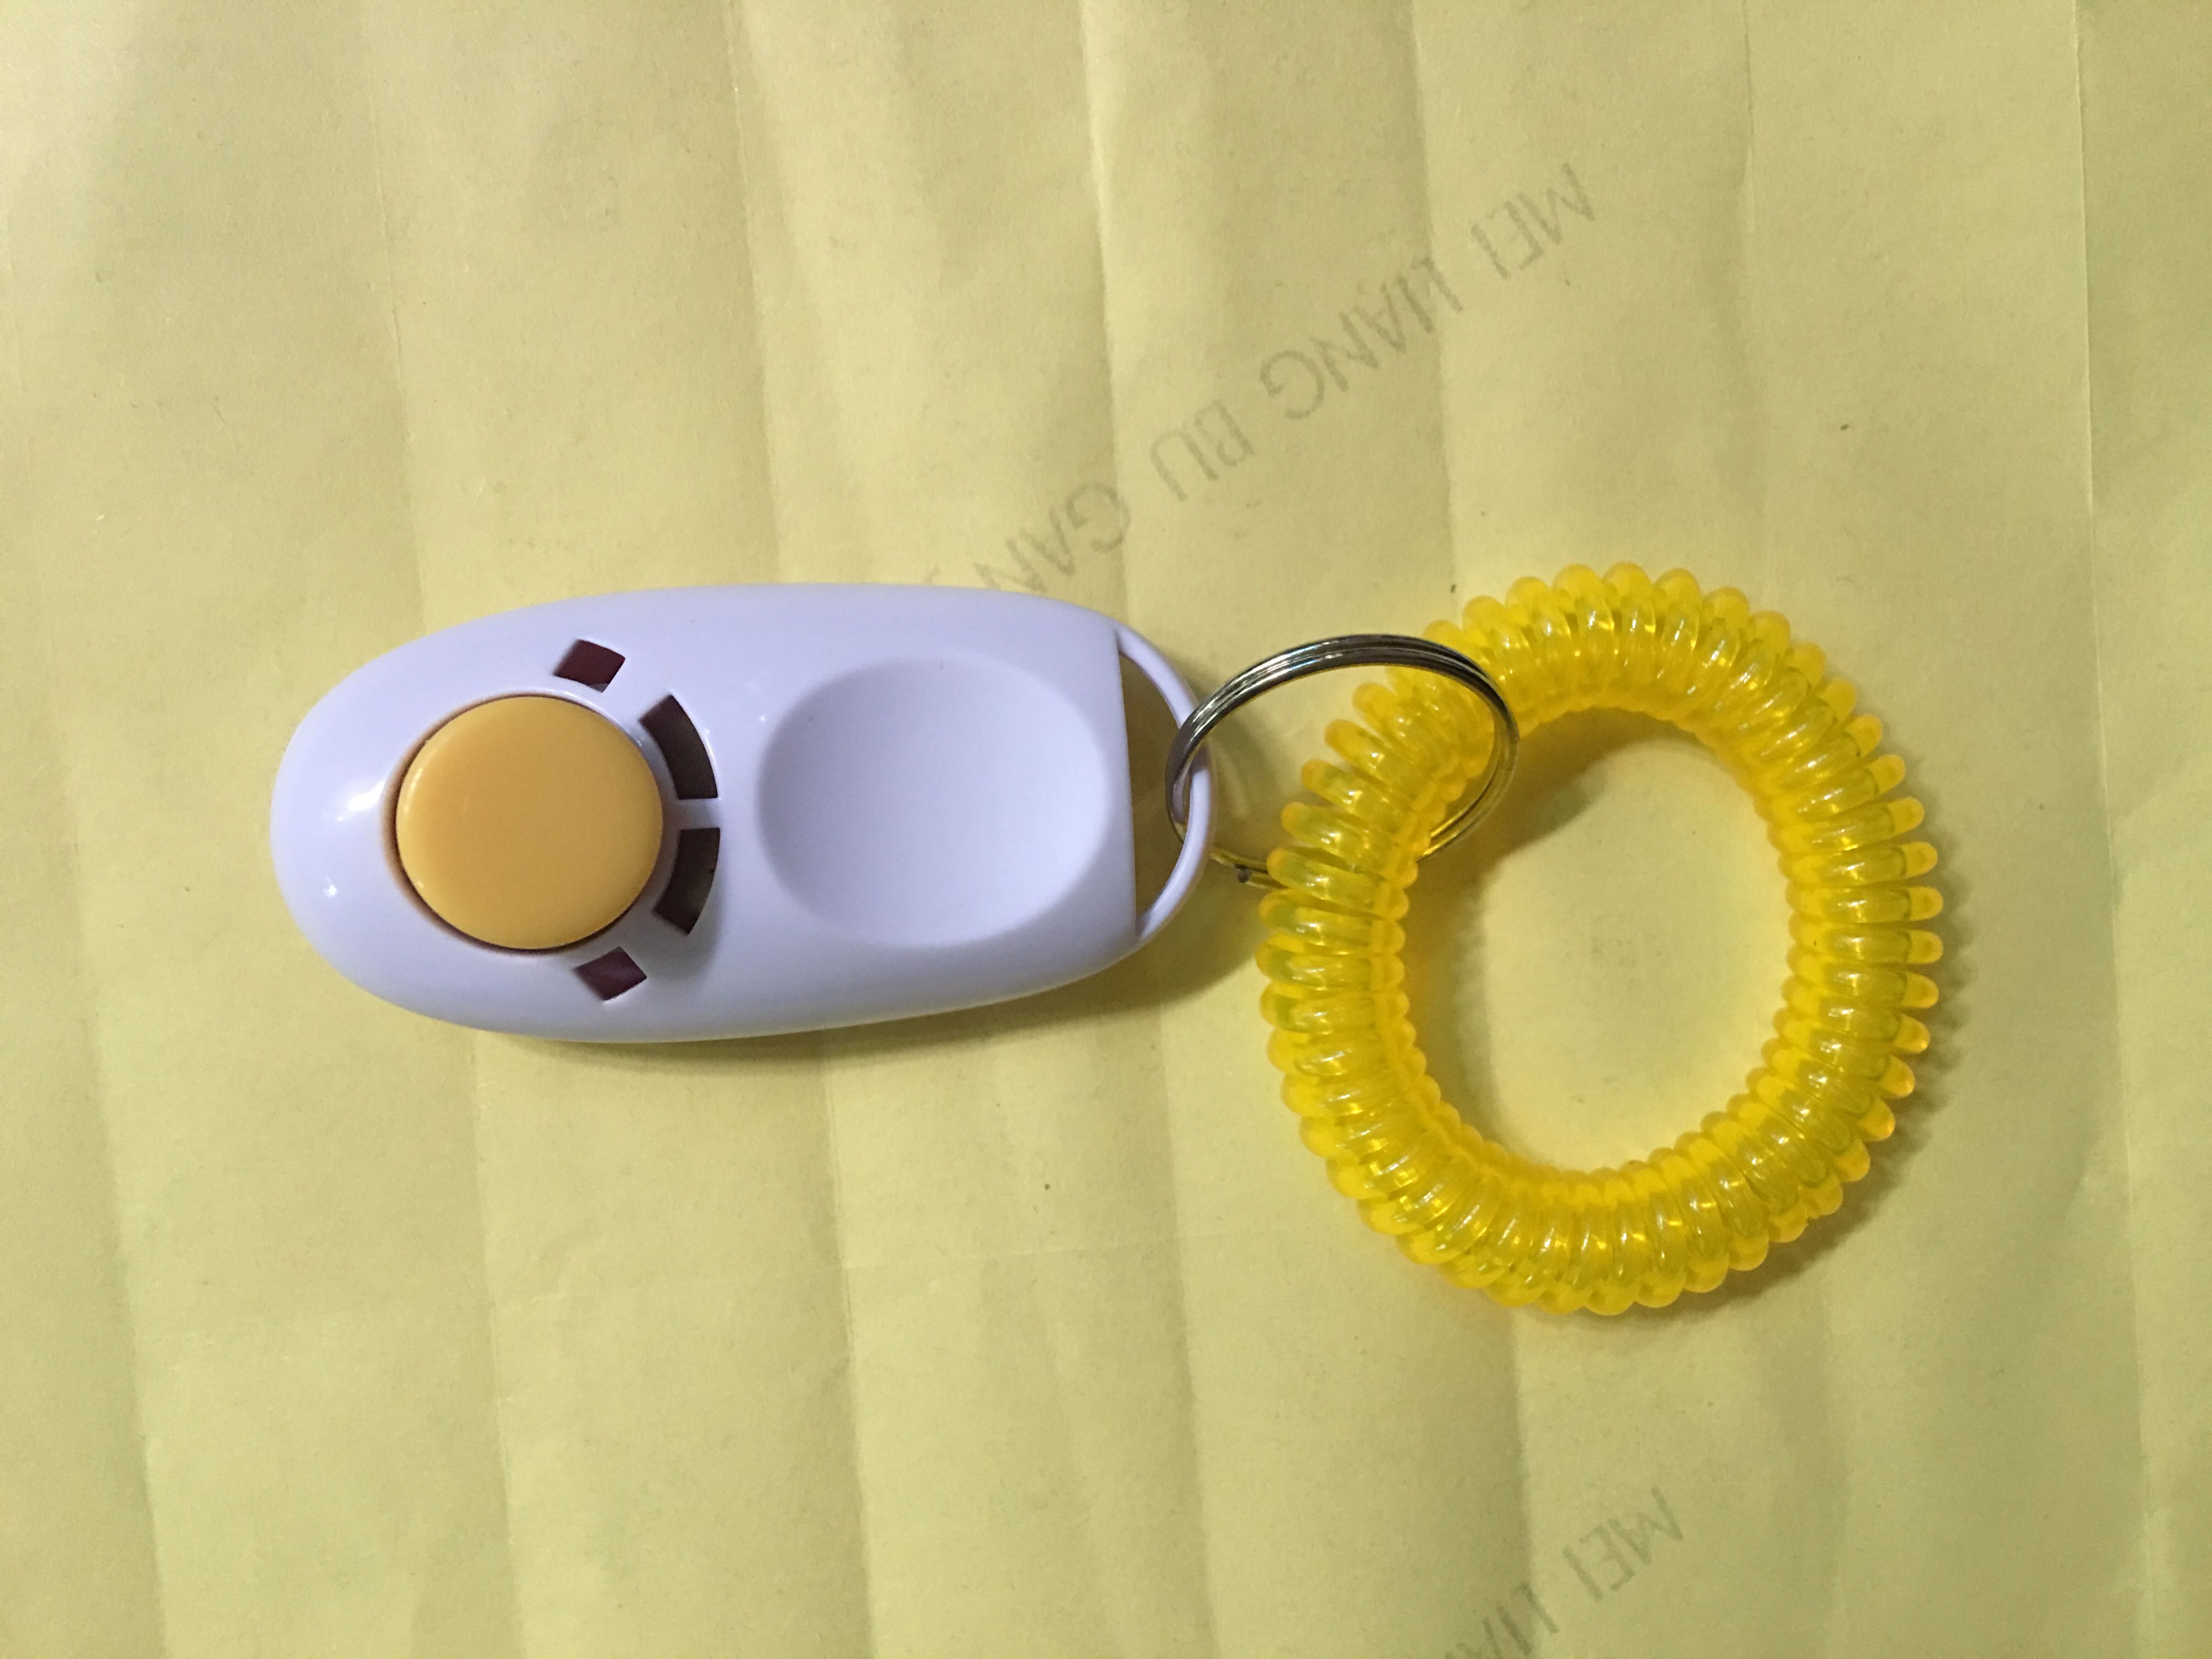 Pet Dog Metal clicker Big Button Dog Training Clickers with Plastic Wrist Band